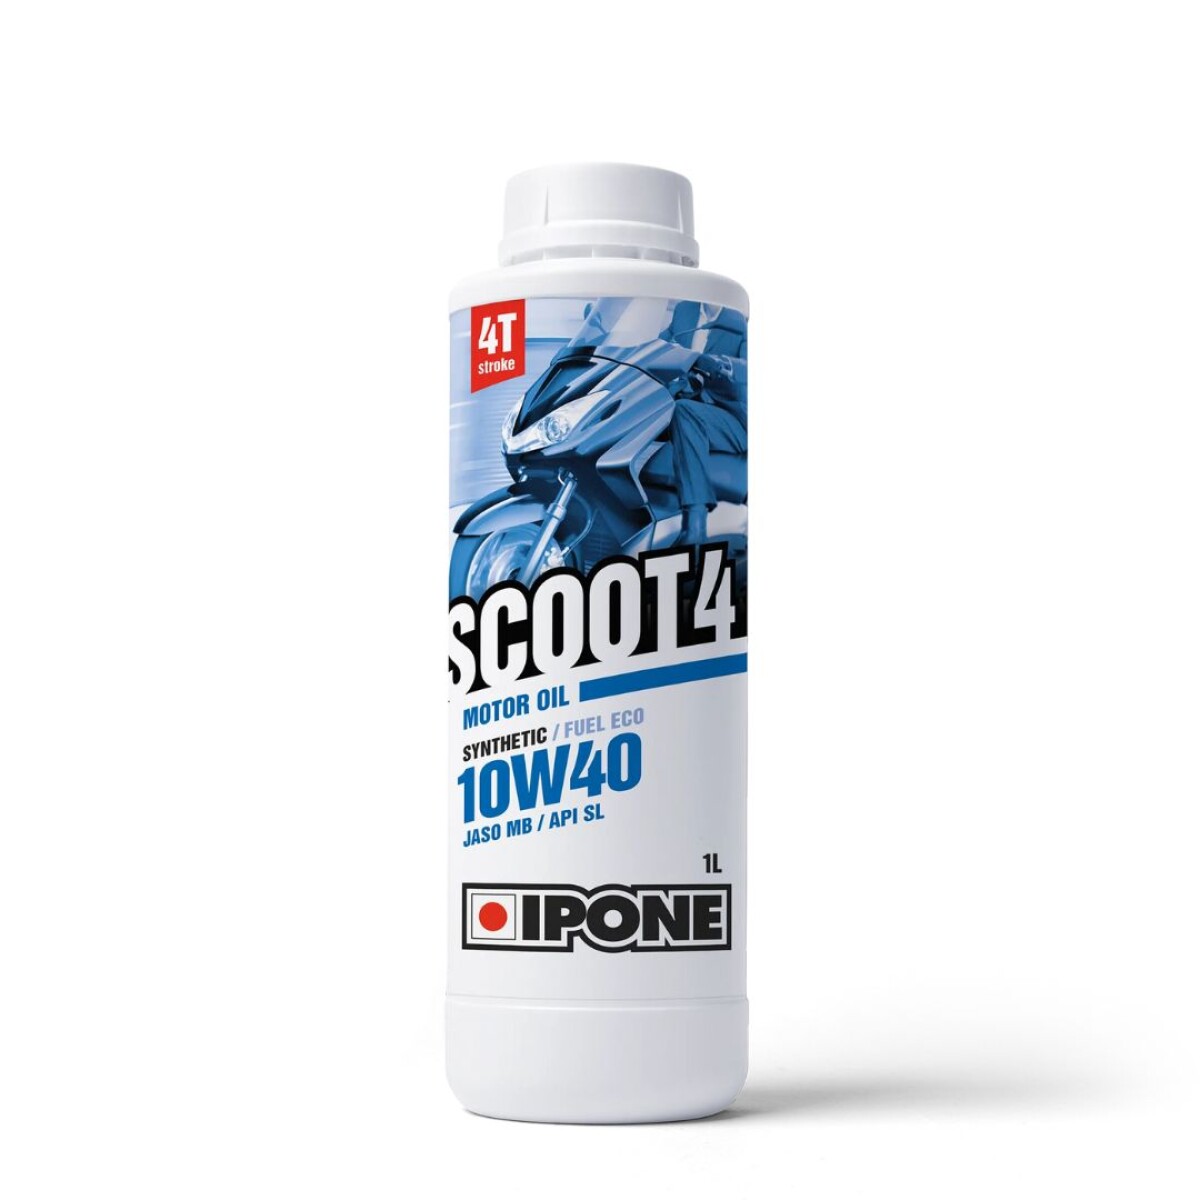 Aceite Ipone Scoot 4 10W40 